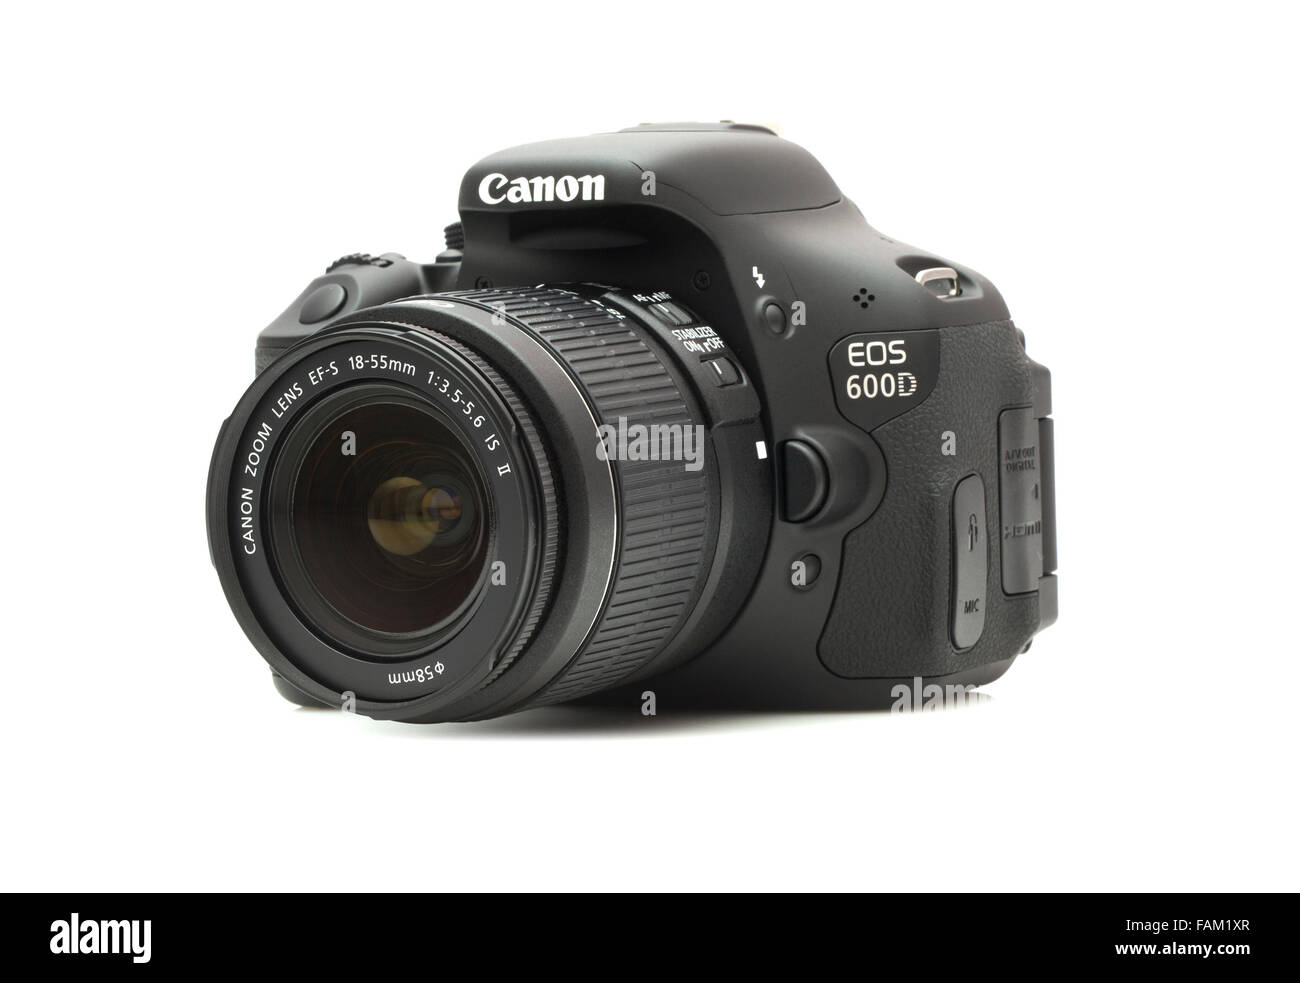 Canon 600D DSLR Camera on a White Background Stock Photo